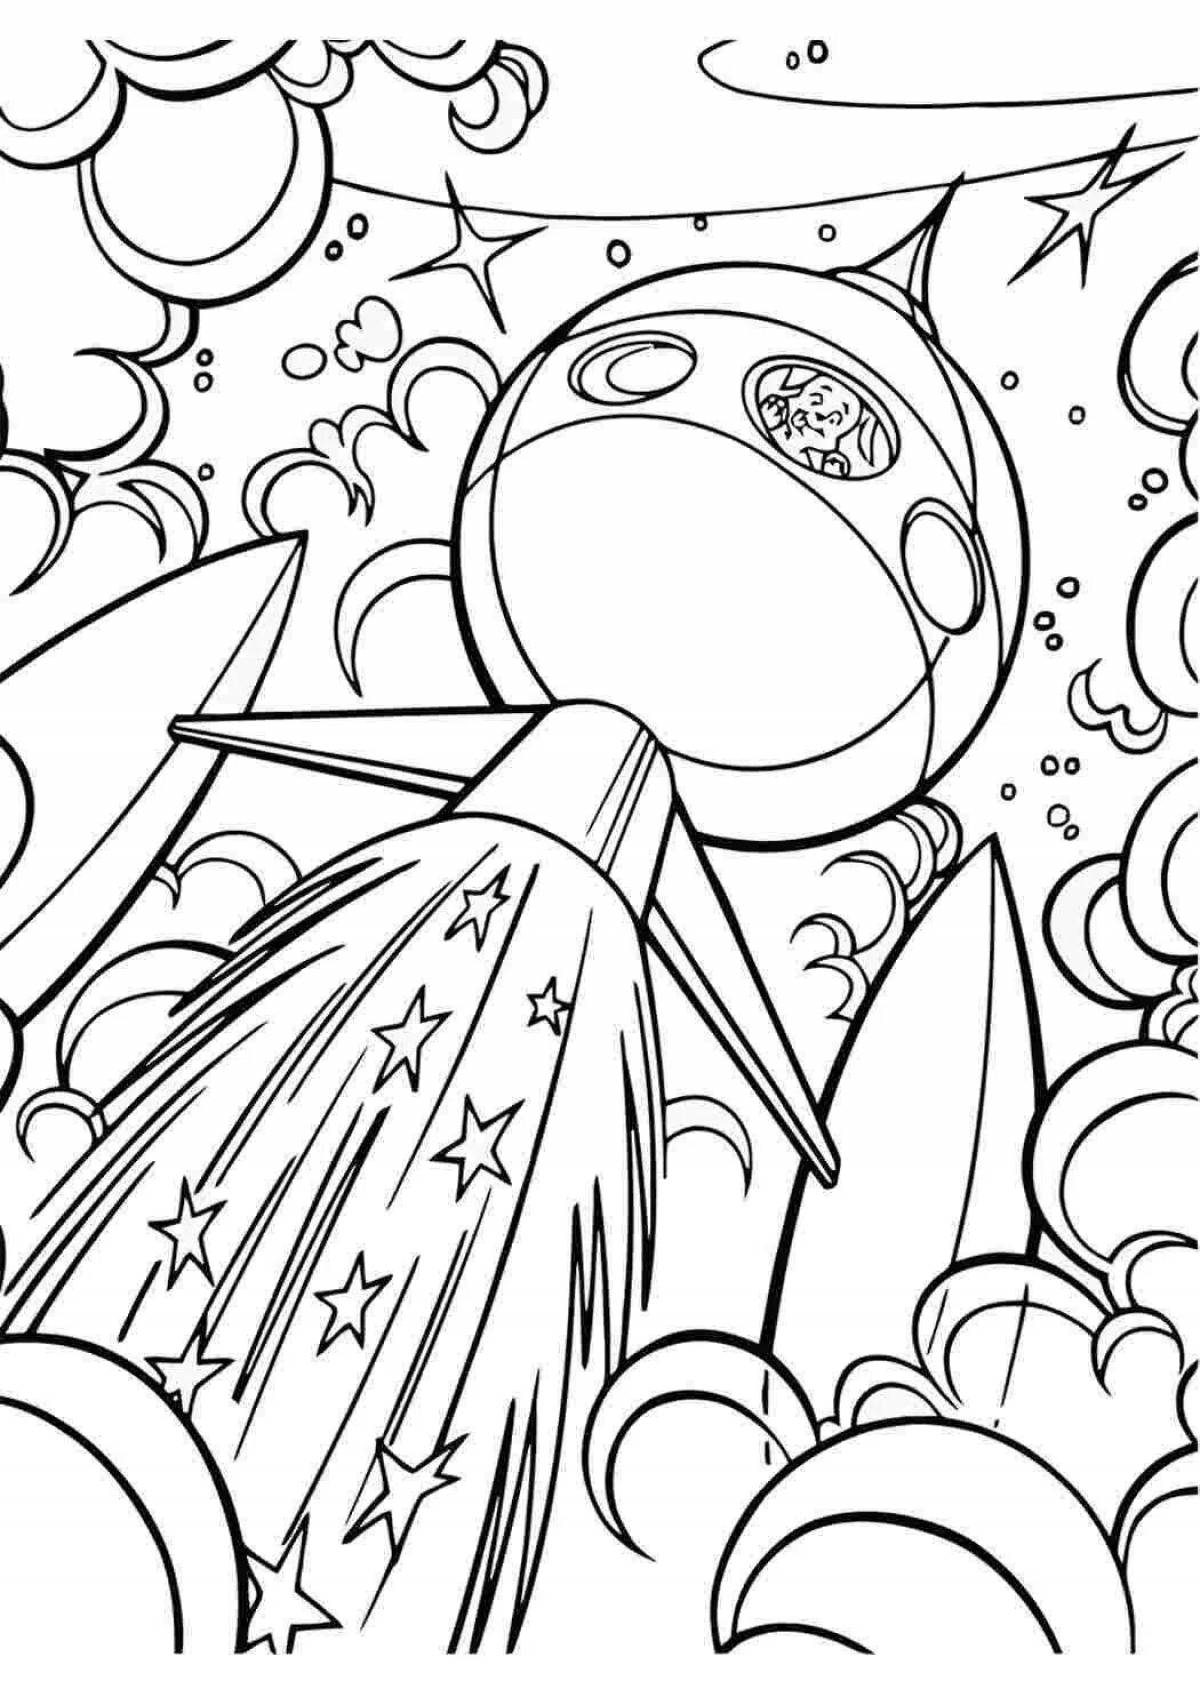 Coloring book flawless space complex